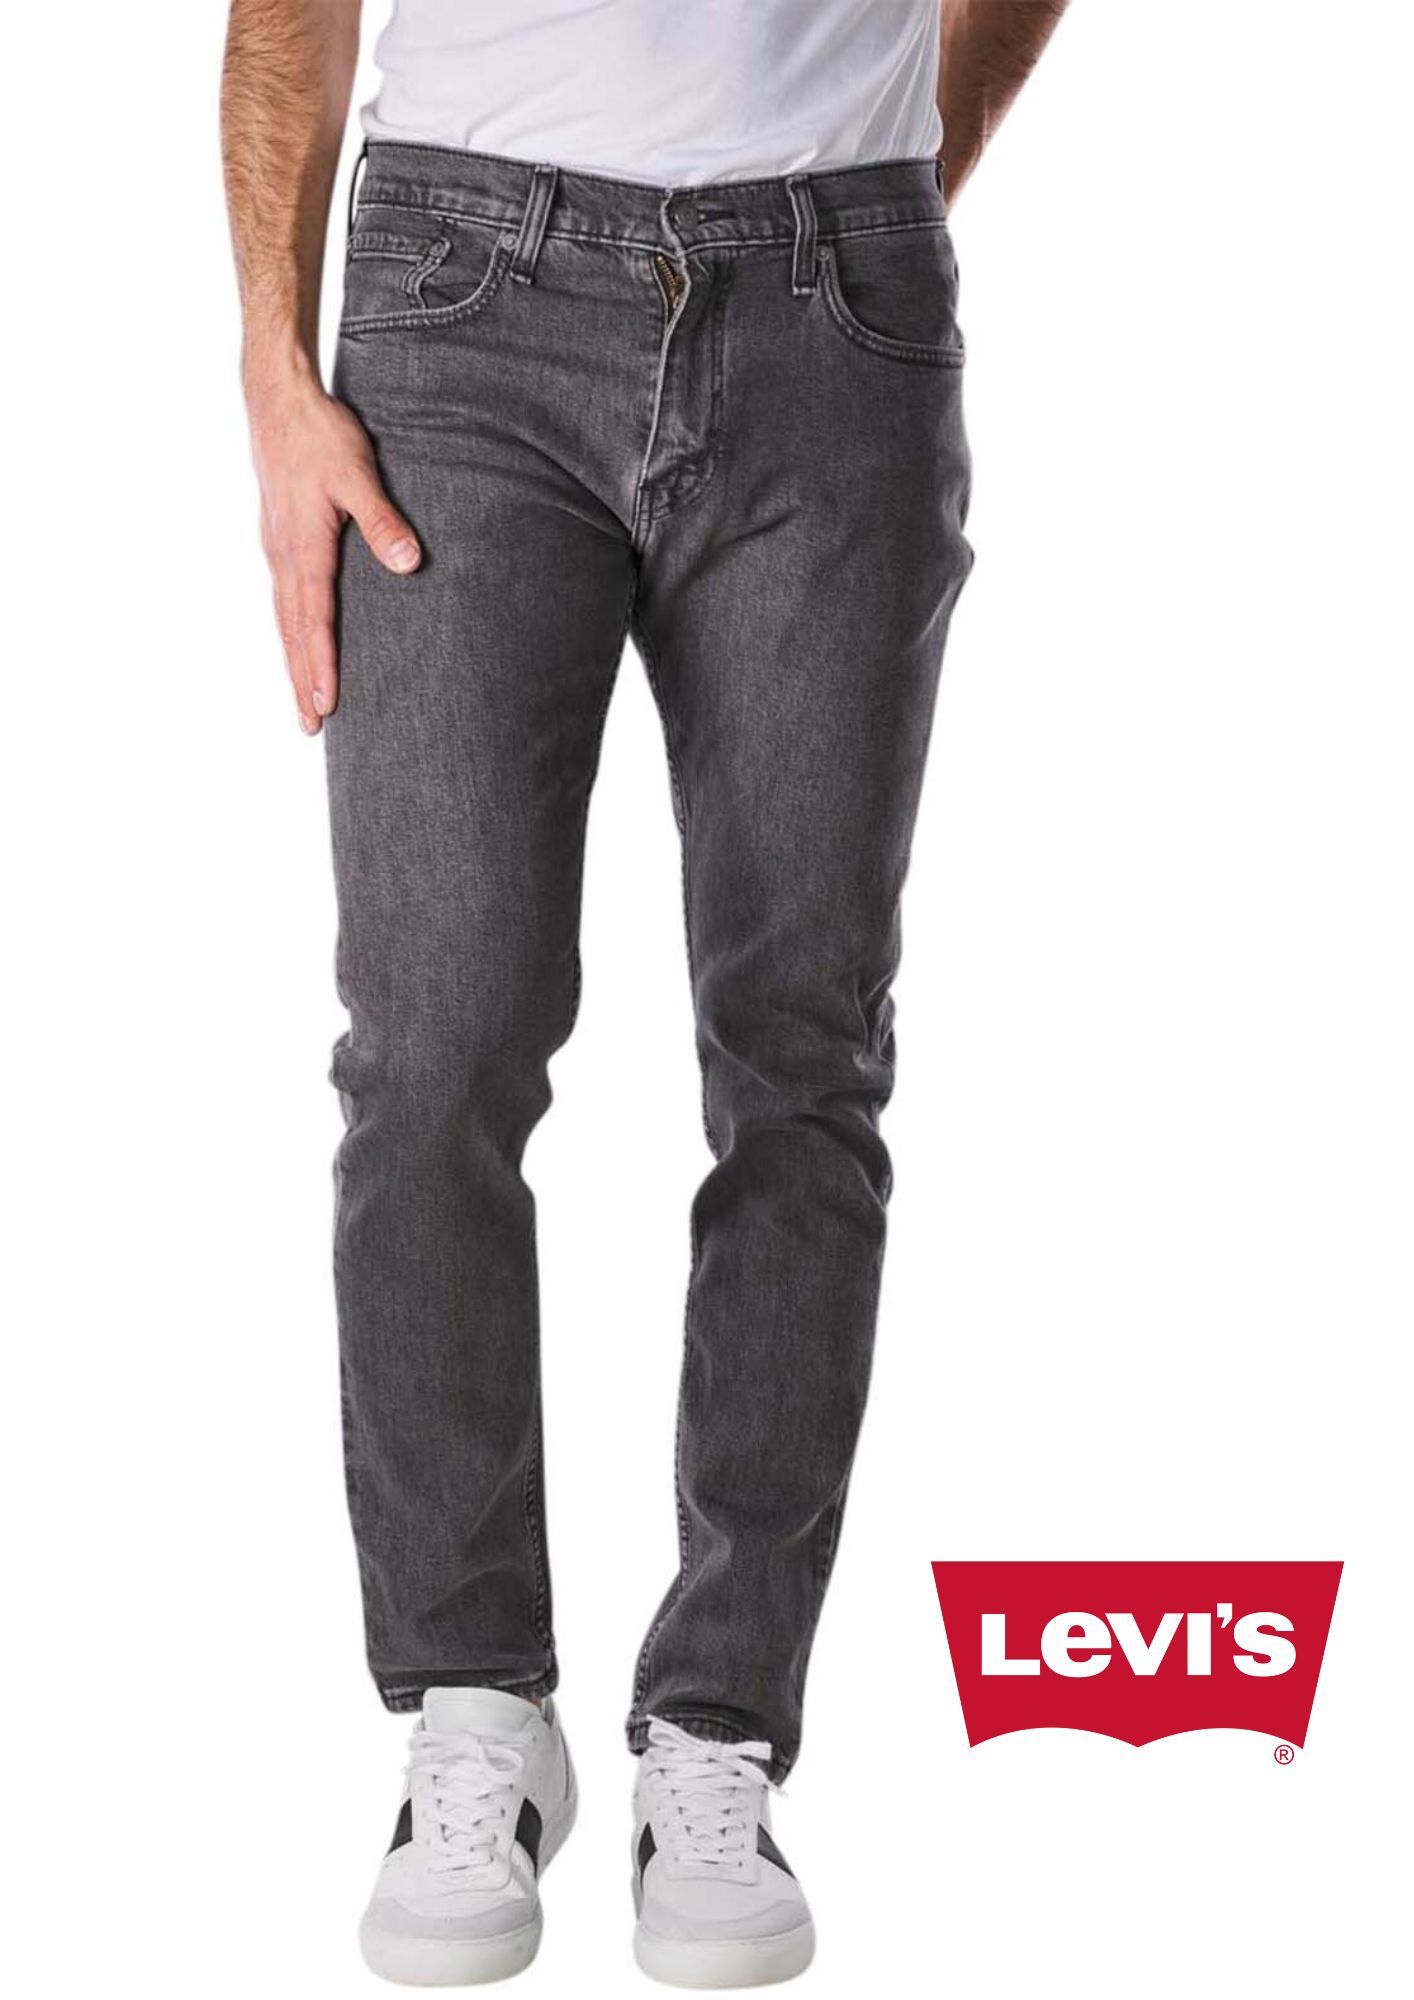 Looking to Buy Levi